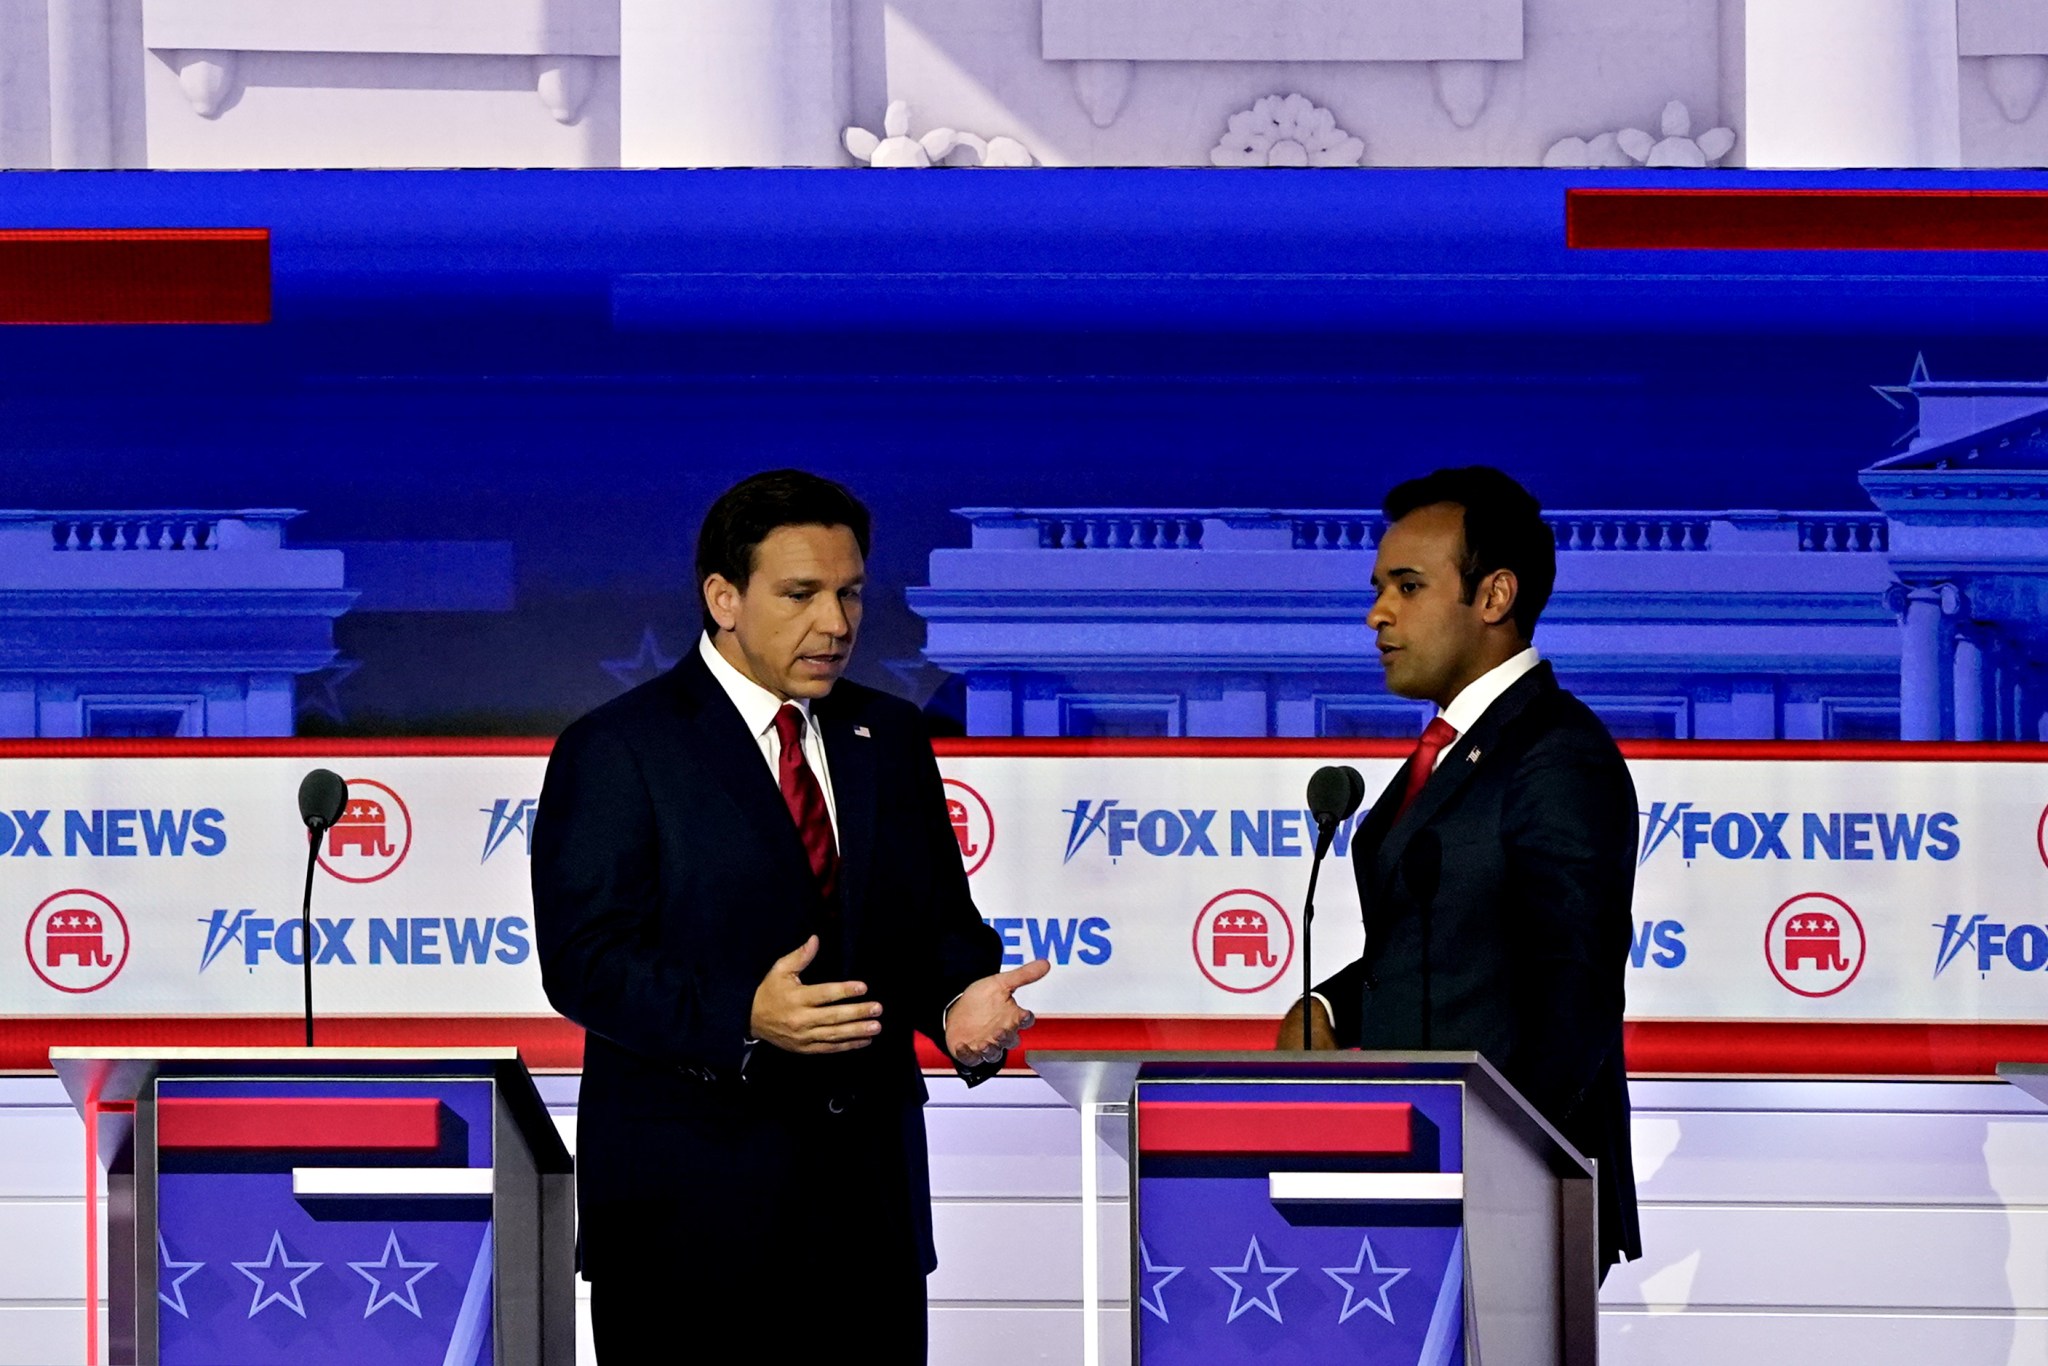 How to watch or stream the second Republican debate live online free without cable: Fox, rumble